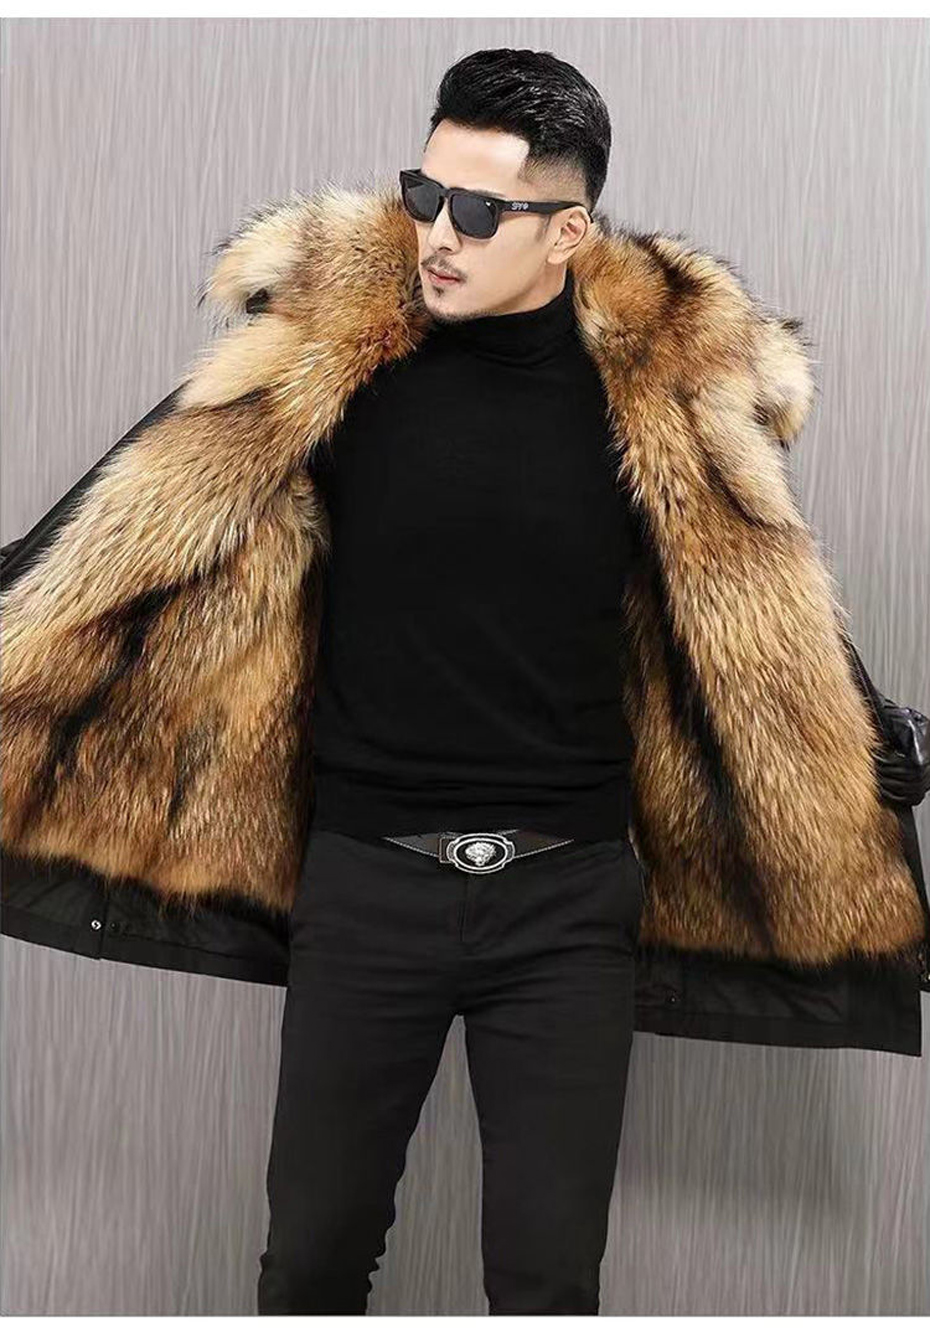 Winter Parka Men's thick cotton coat men Big Fake fur raccoon Hooded coat to keep warm for Russian winter